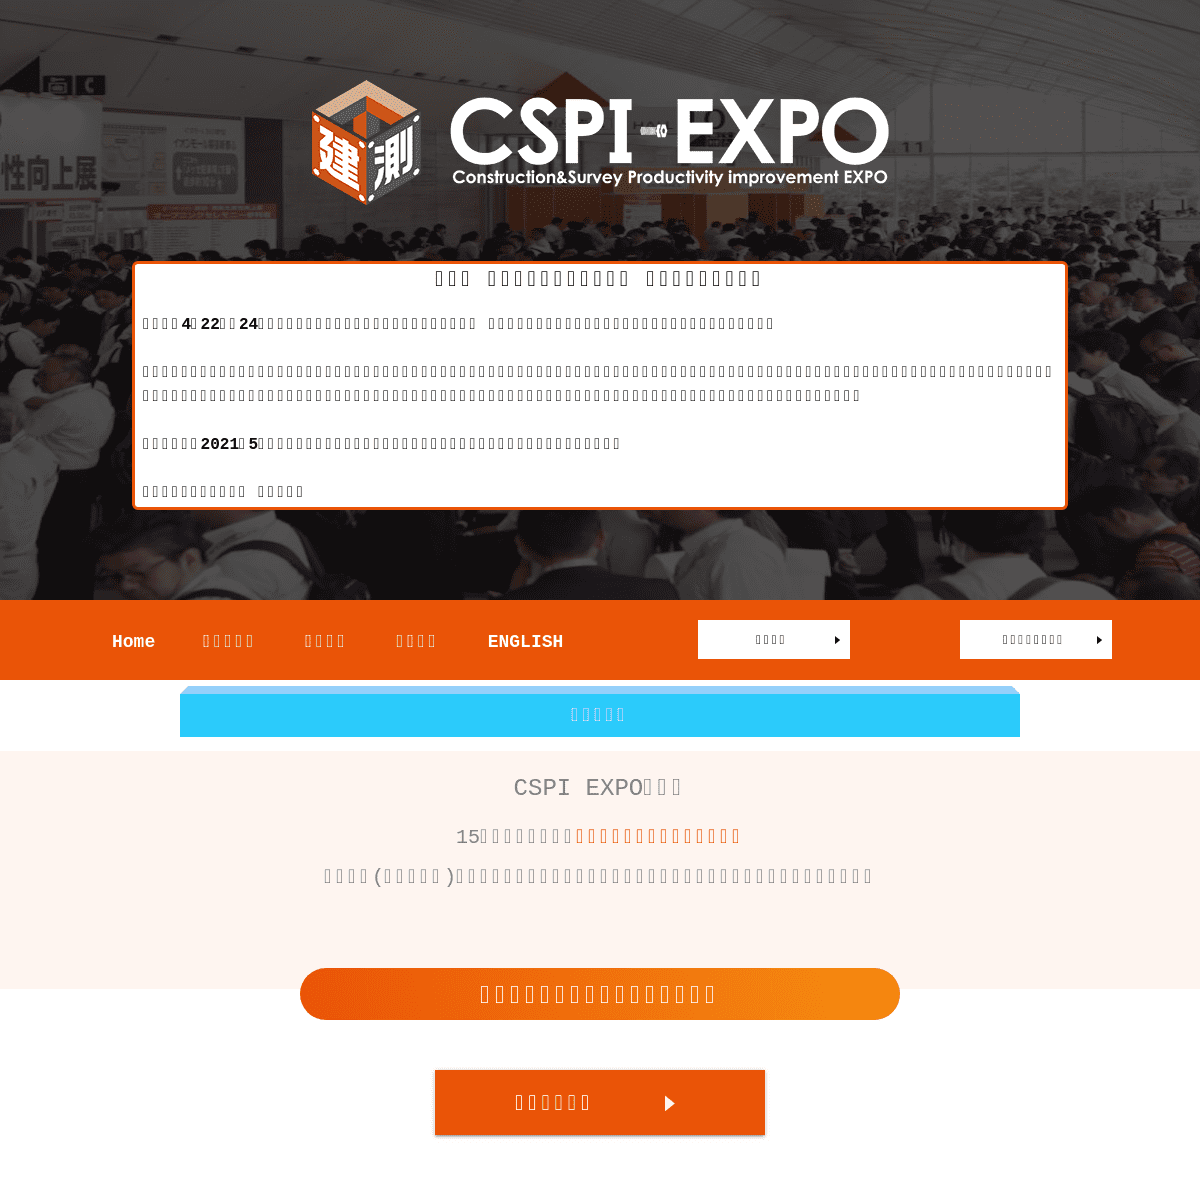 A complete backup of cspi-expo.com